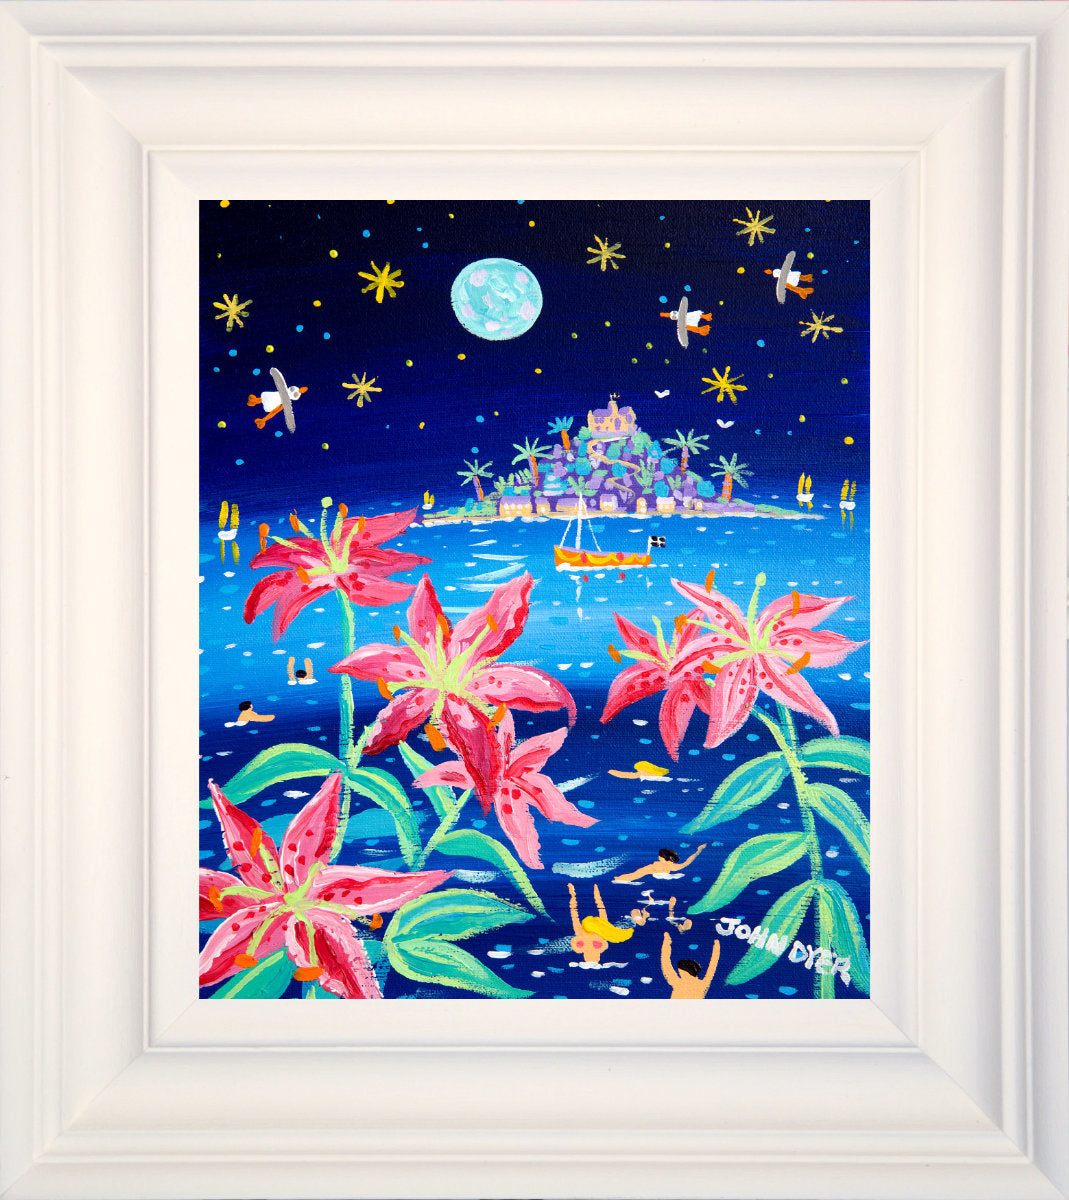 Cornwall Art Gallery Painting by John Dyer. &#39;Full Moon Pink Lilies, St Michael&#39;s Mount&#39;, 12 x 10 inches acrylic on canvas.